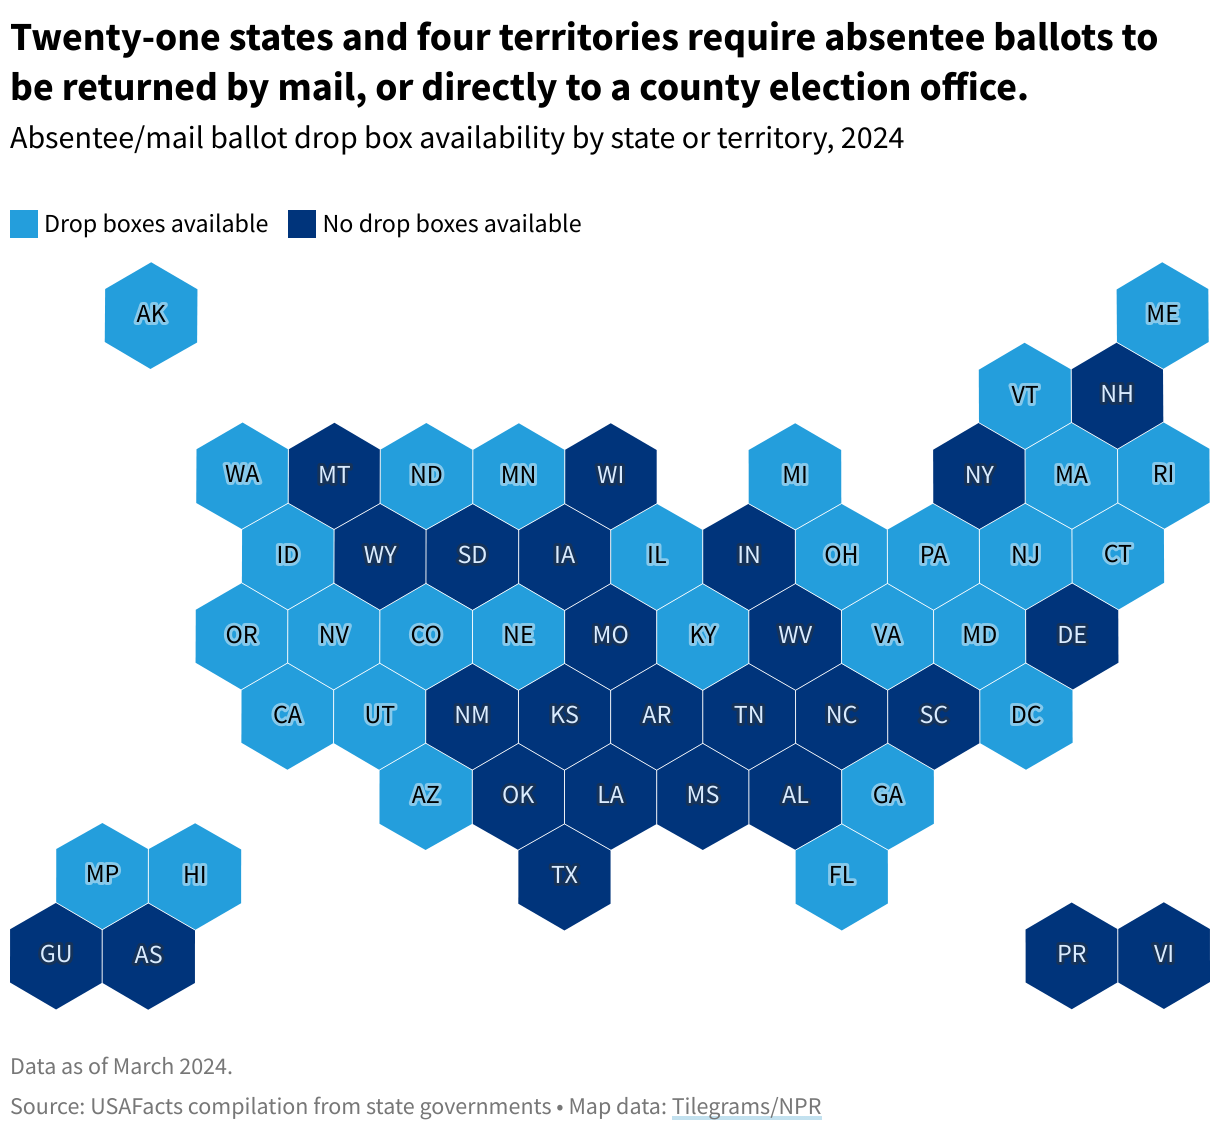 Hex map showing ballot drop box availability state